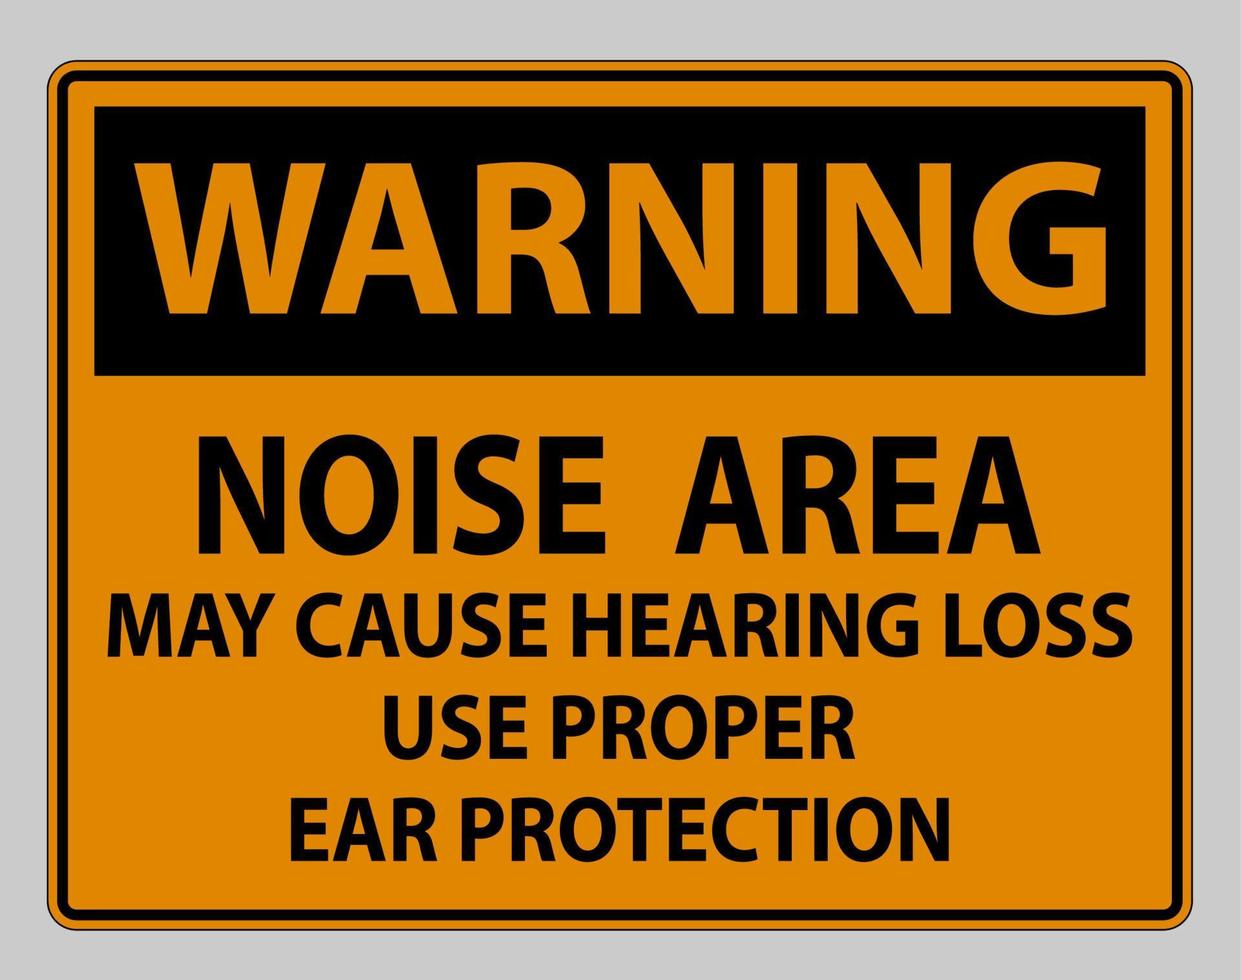 Warning Sign Noise Area May Cause Hearing Loss Use Proper Ear Protection vector